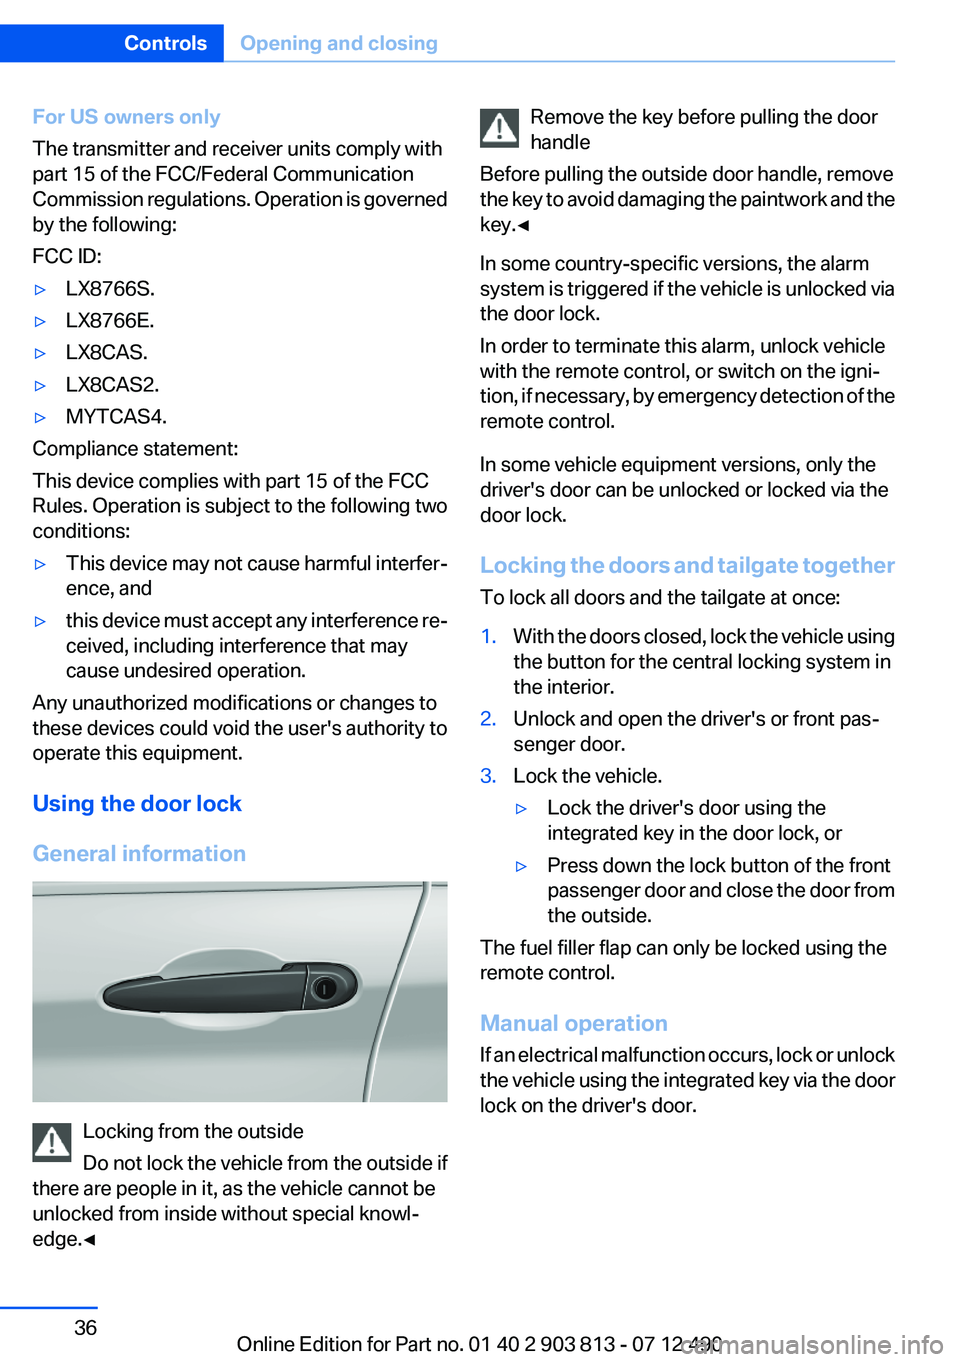 BMW X3 XDRIVE 35I 2013 Owners Guide For US owners only
The transmitter and receiver units comply with
part 15 of the FCC/Federal Communication
Commission regulations. Operation is governed
by the following:
FCC ID:▷LX8766S.▷LX8766E.